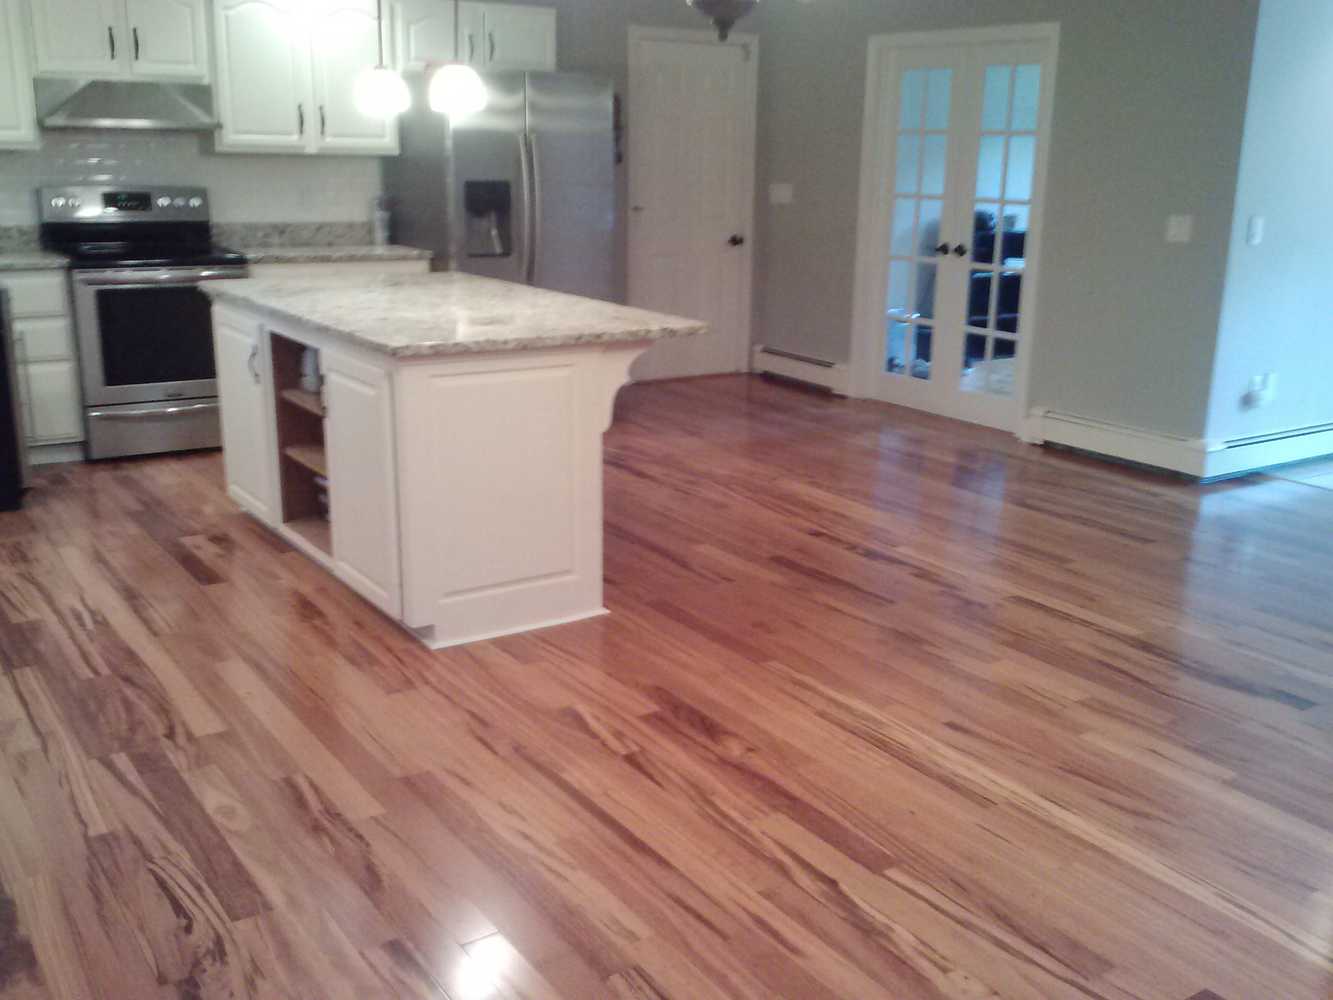 Installed Pre-Finished Hardwood Flooring (Bellawood Brazilian Koa) that our client purchased at Lumber Liquidators